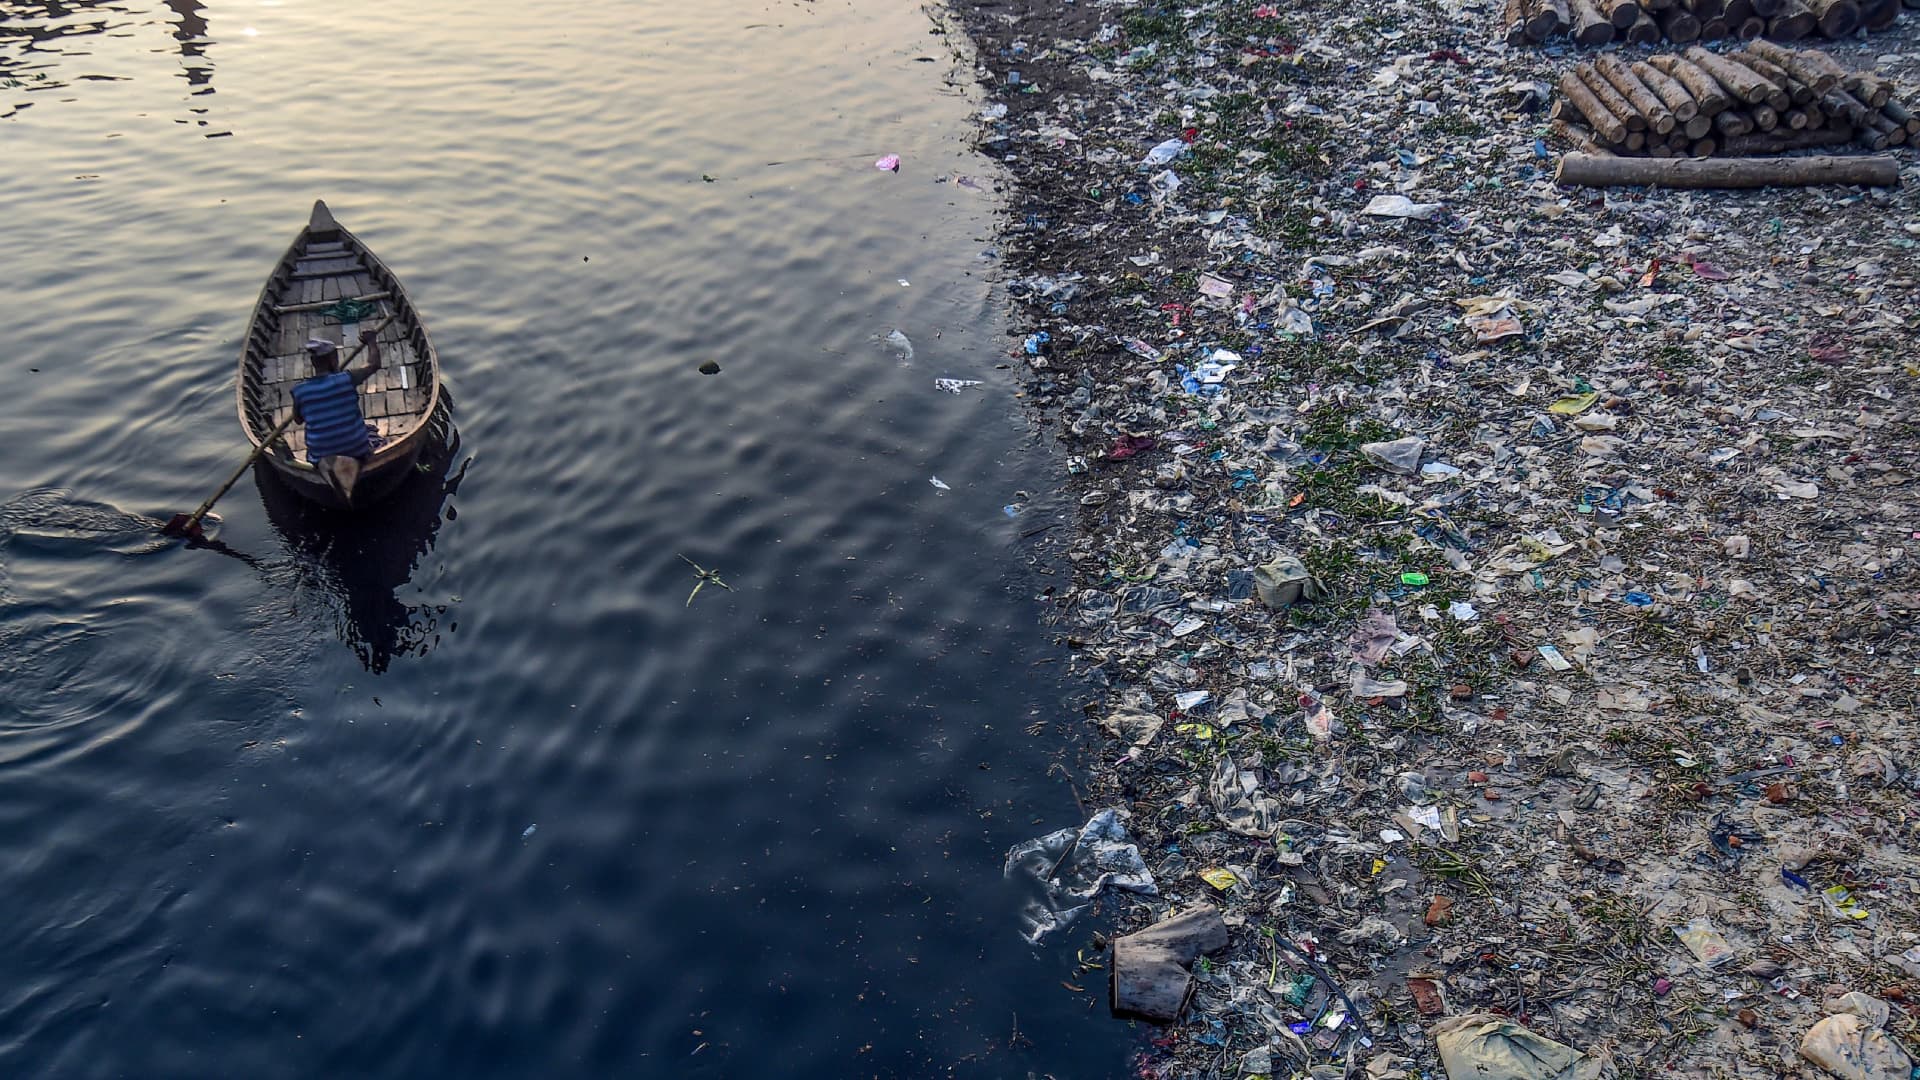 A man paddles on a boat as plastic bags float on the water surface of the Buriganga river in Dhaka on January 21, 2020.